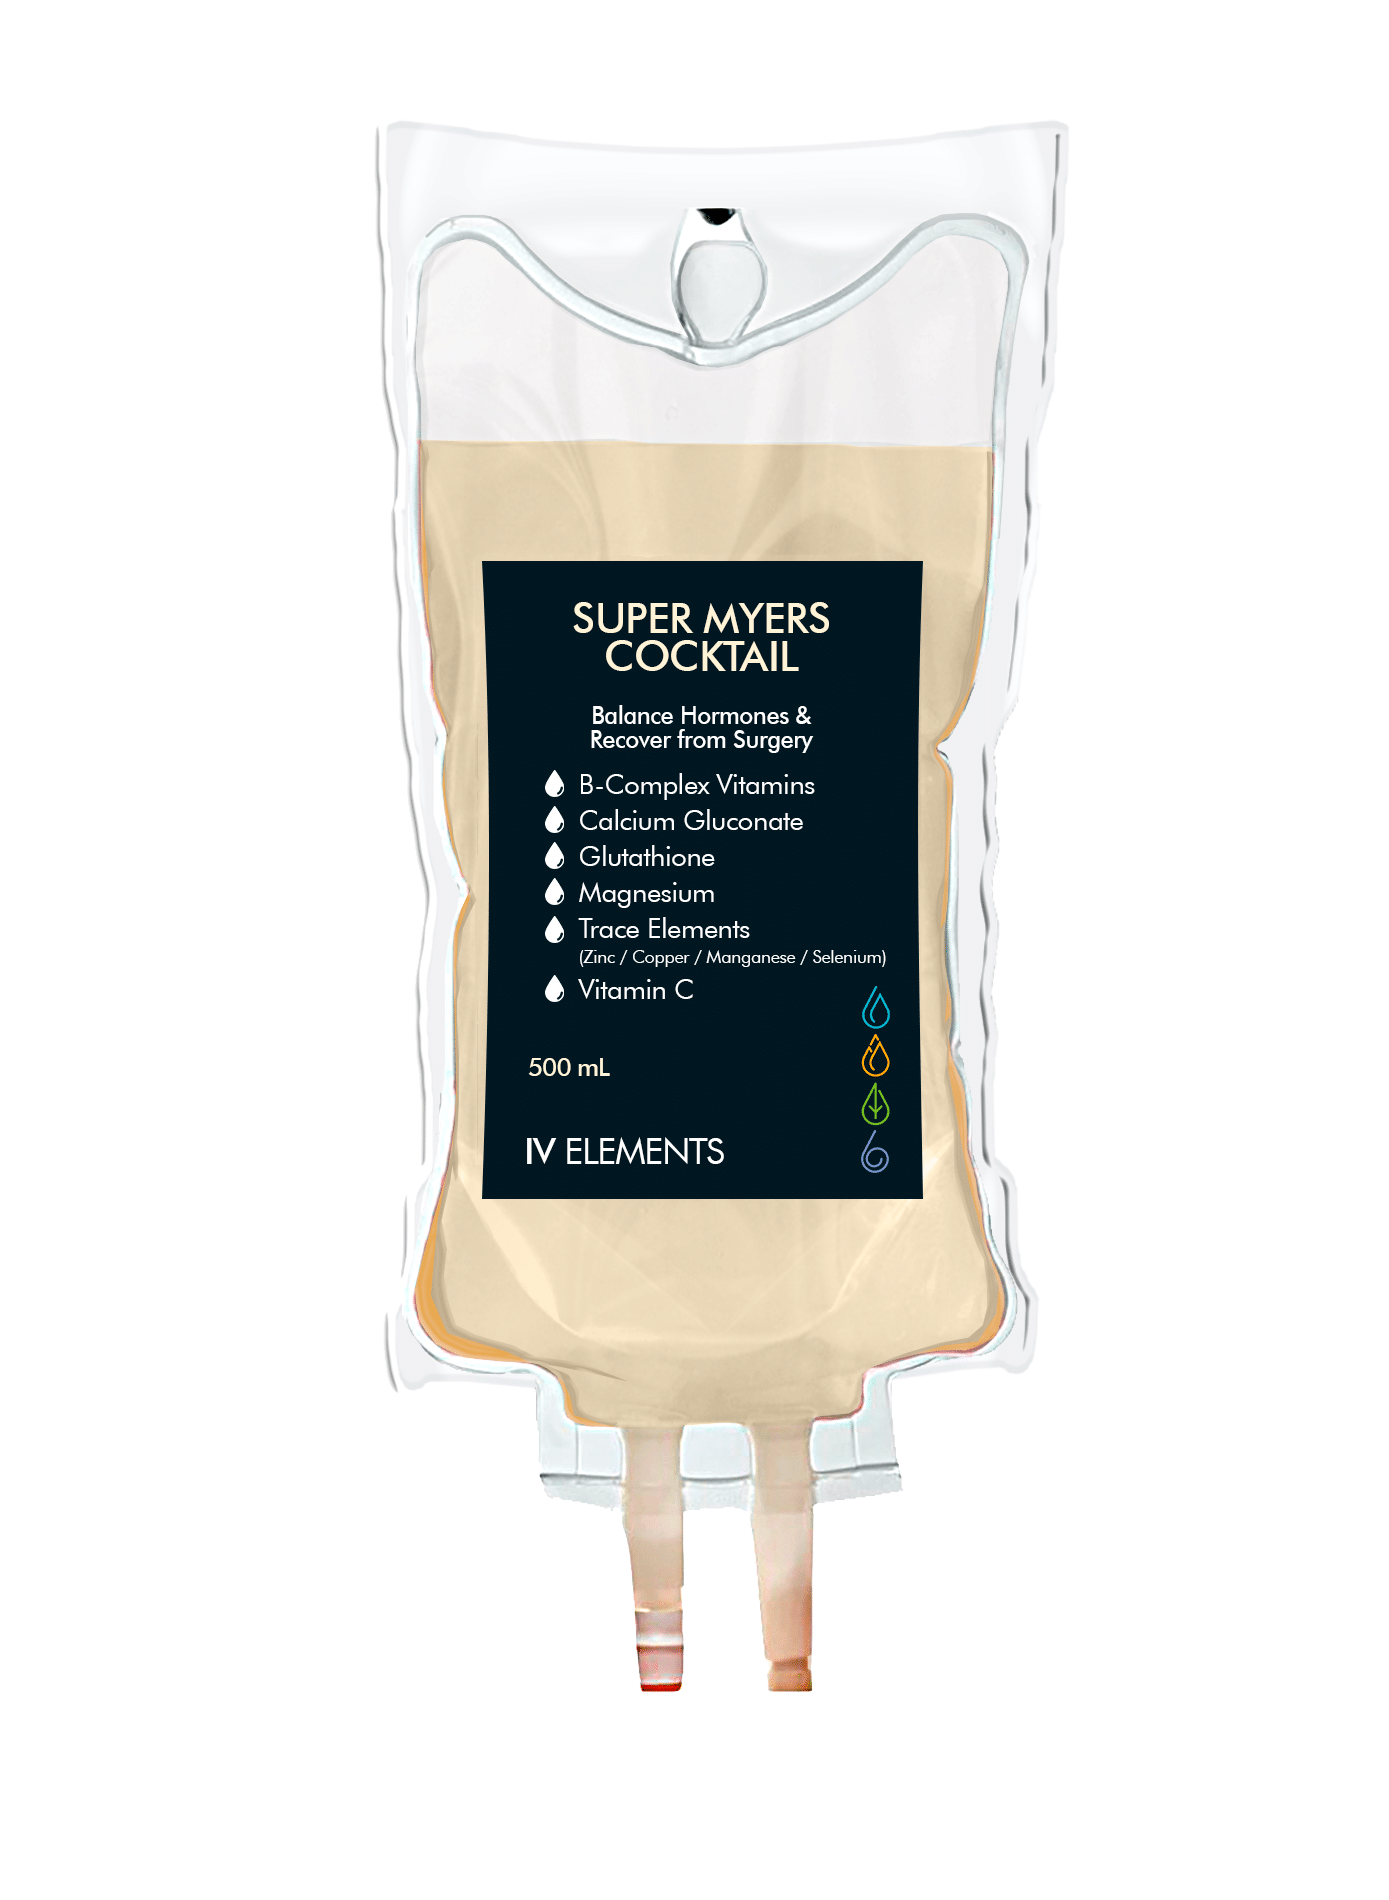 Super Myers Cocktail IV drip bag from IV Elements: Balance hormones & recover from surgery